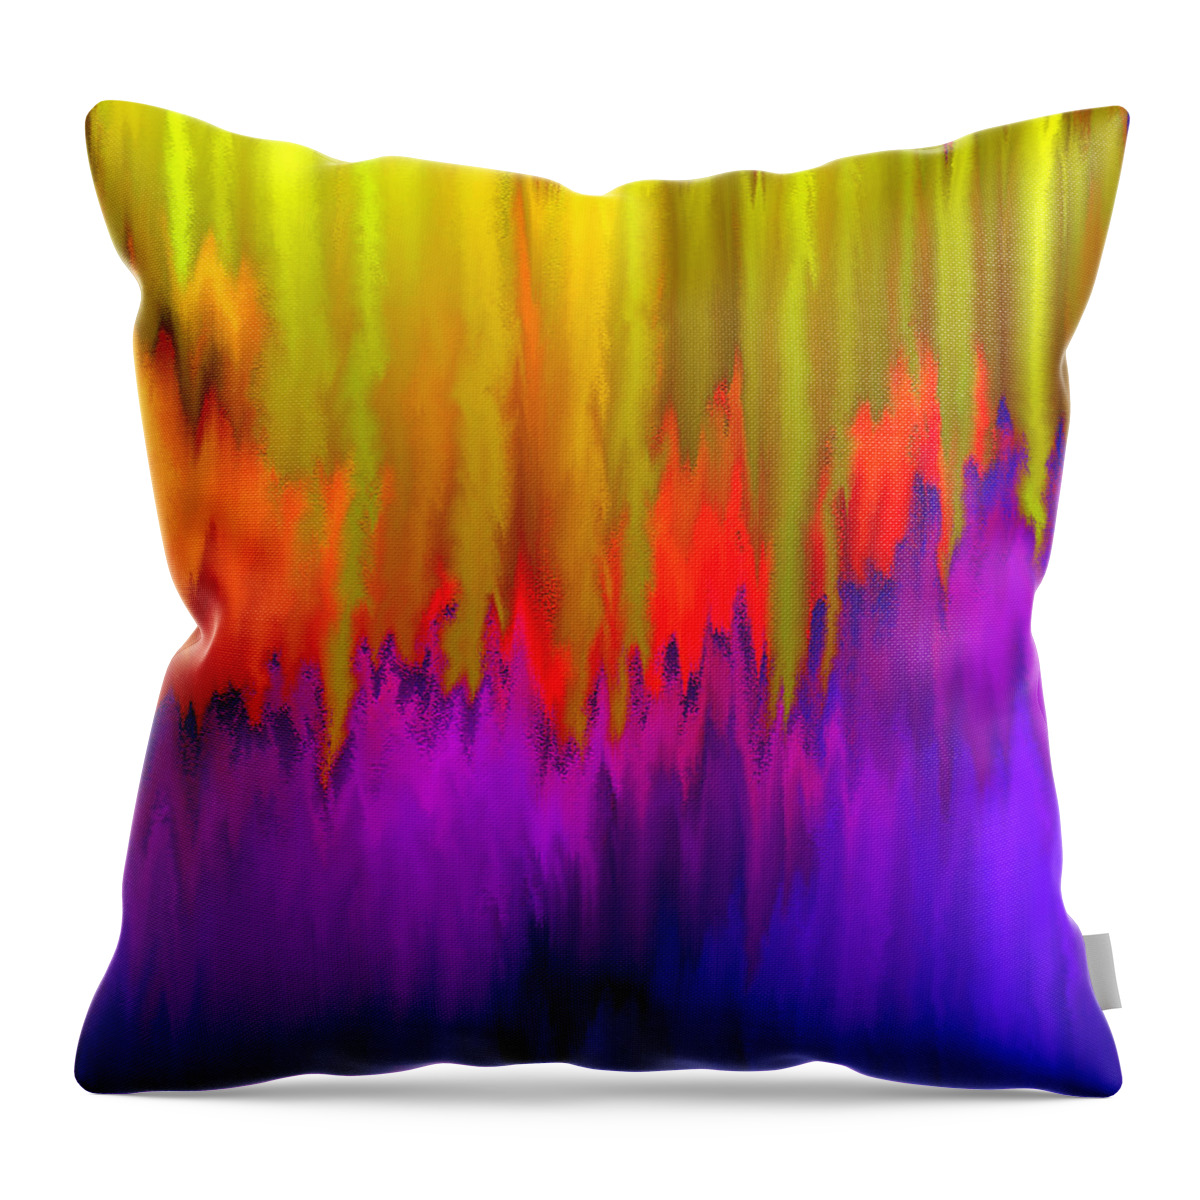 Consciousness Rising Throw Pillow featuring the mixed media Consciousness Rising by Carl Hunter